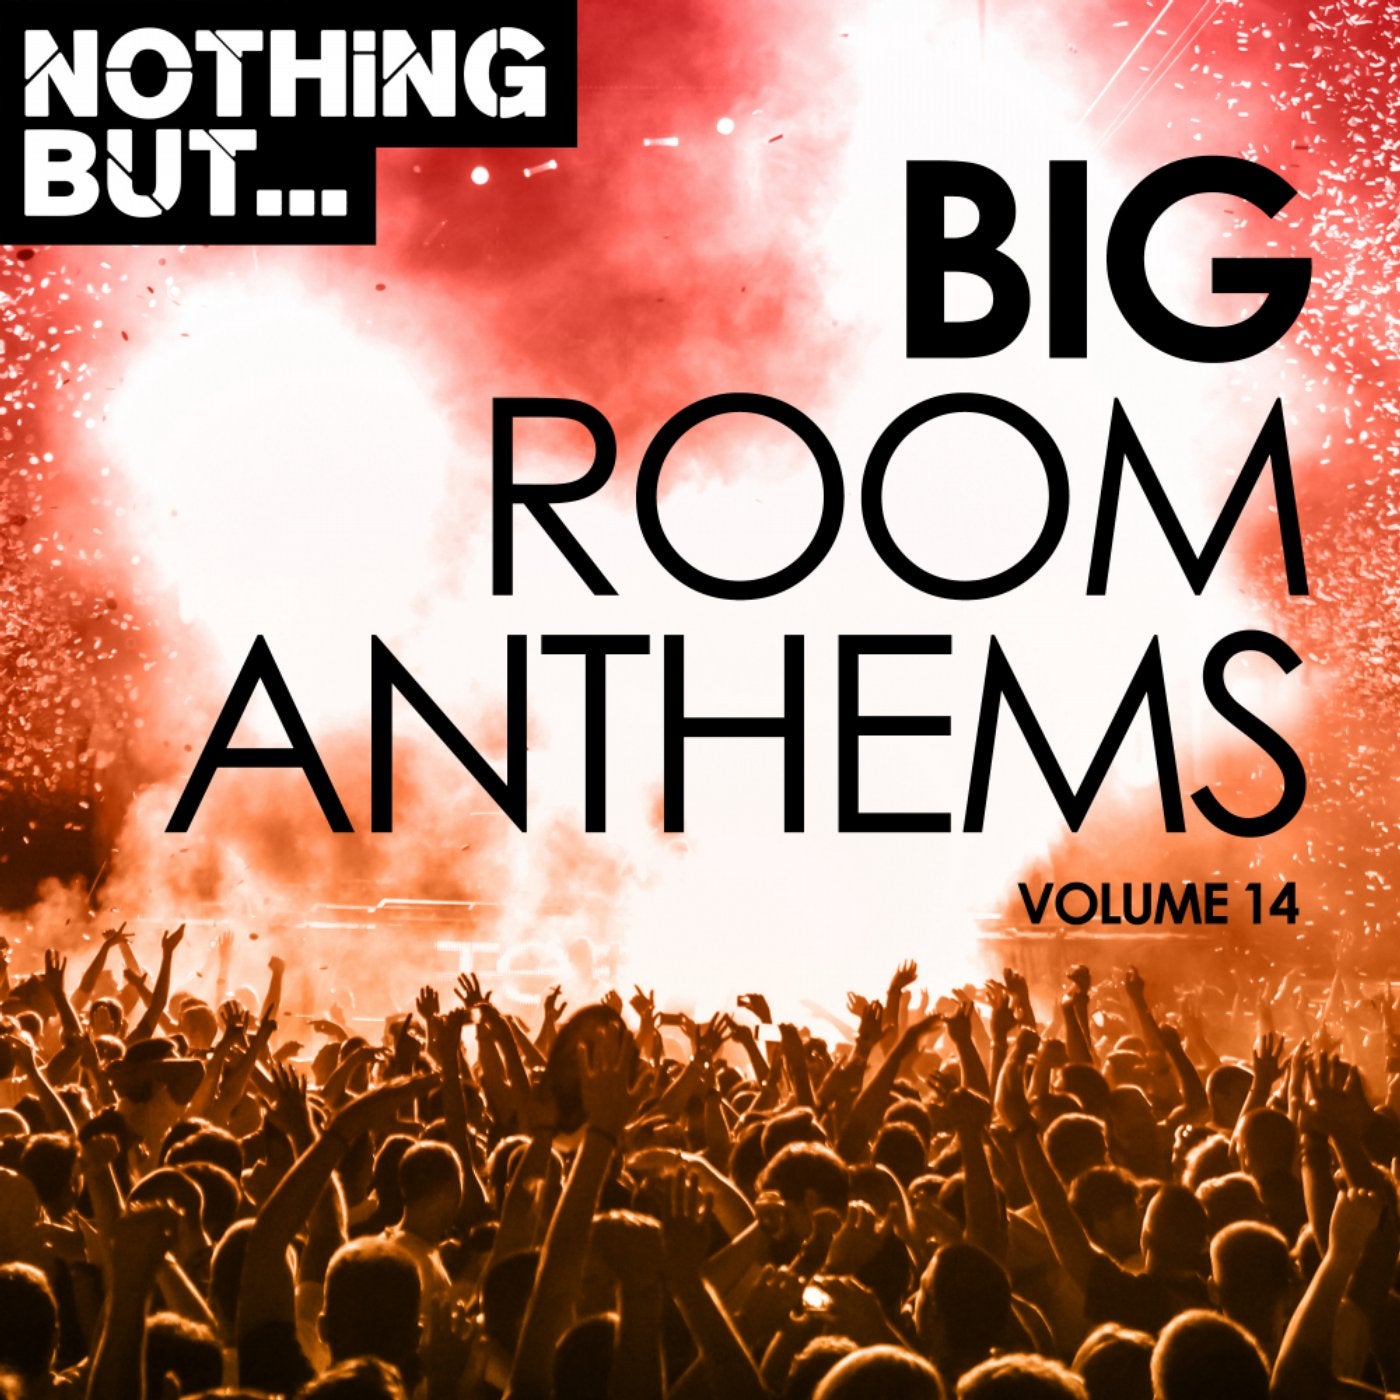 Nothing But... Big Room Anthems, Vol. 14